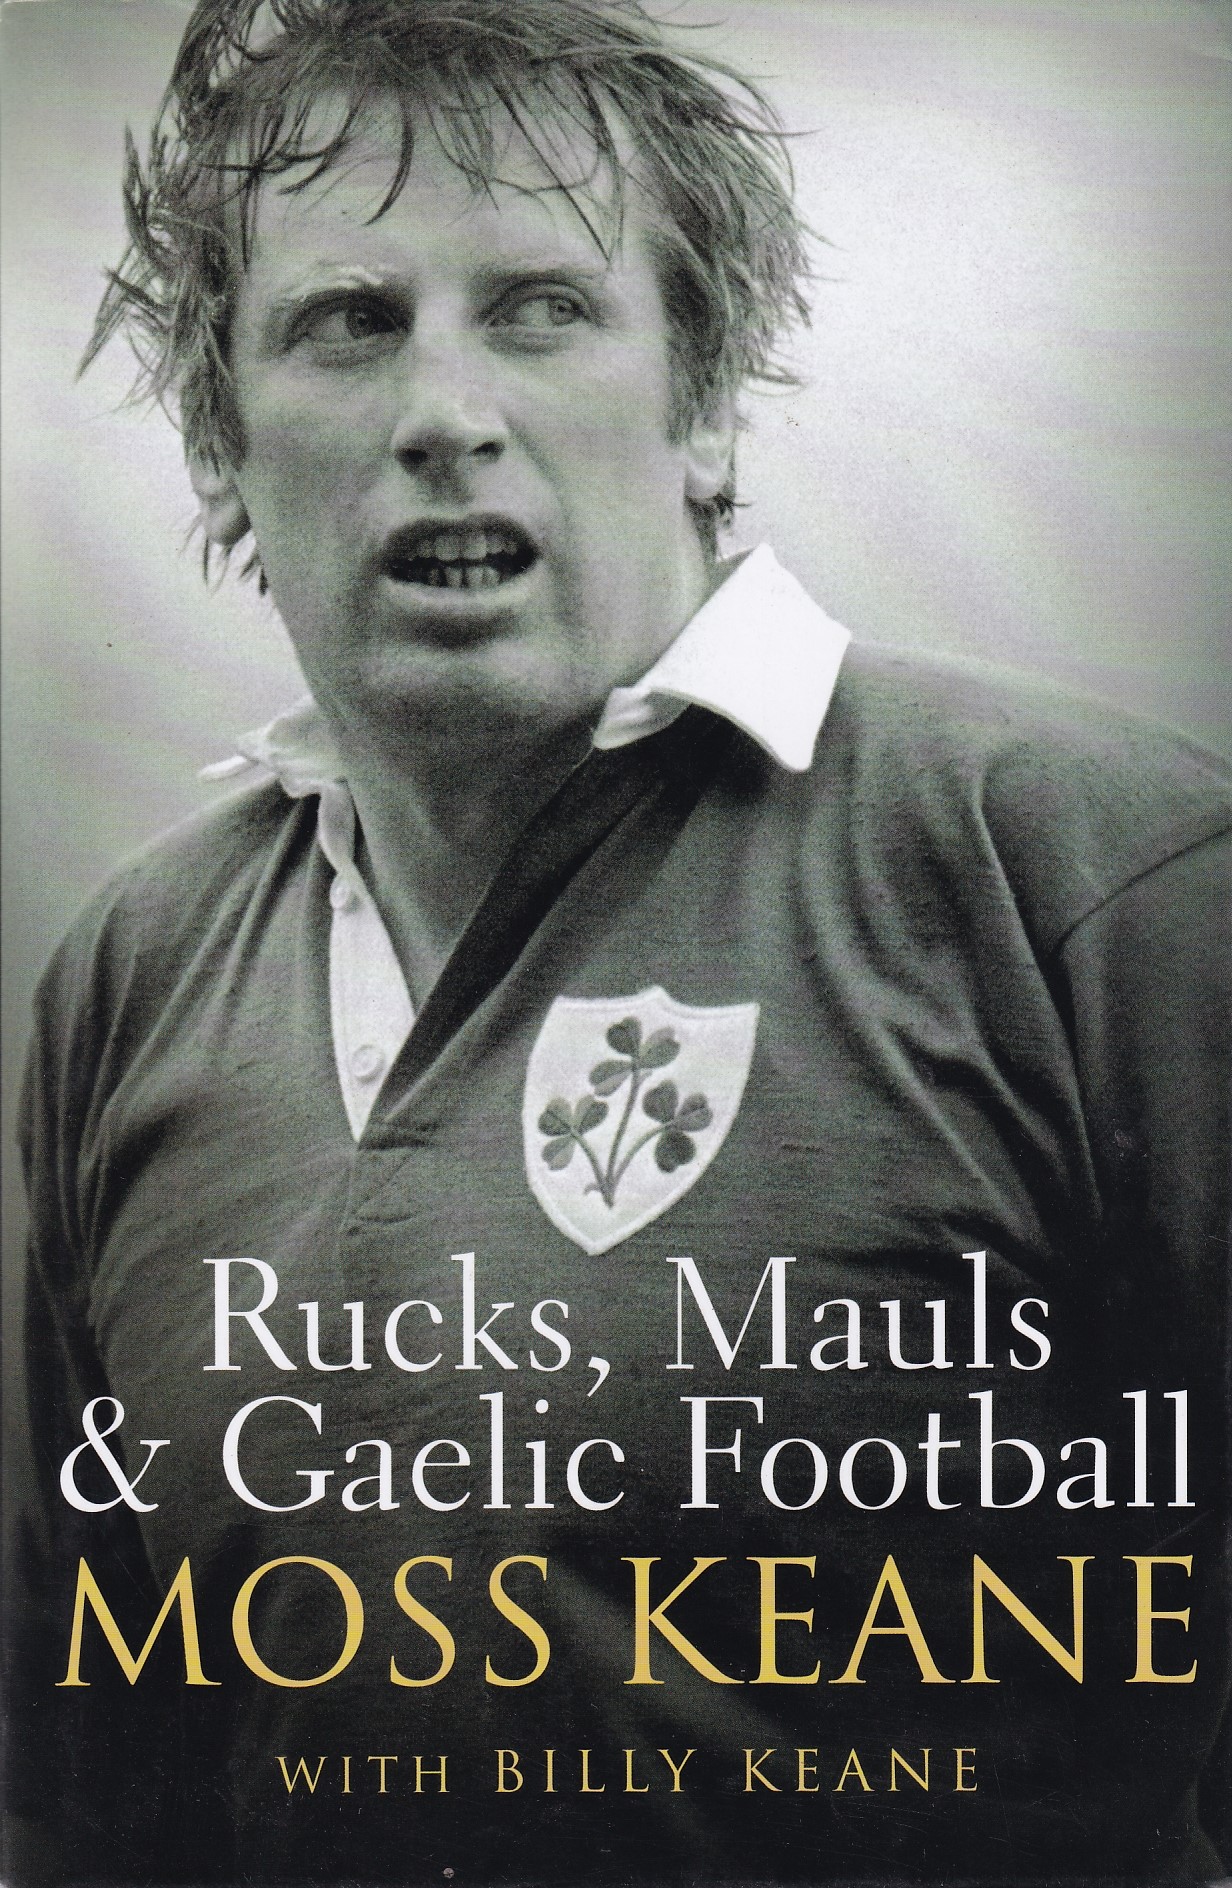 Rucks, Mauls and Gaelic Football by Moss Keane (with Billy Keane)